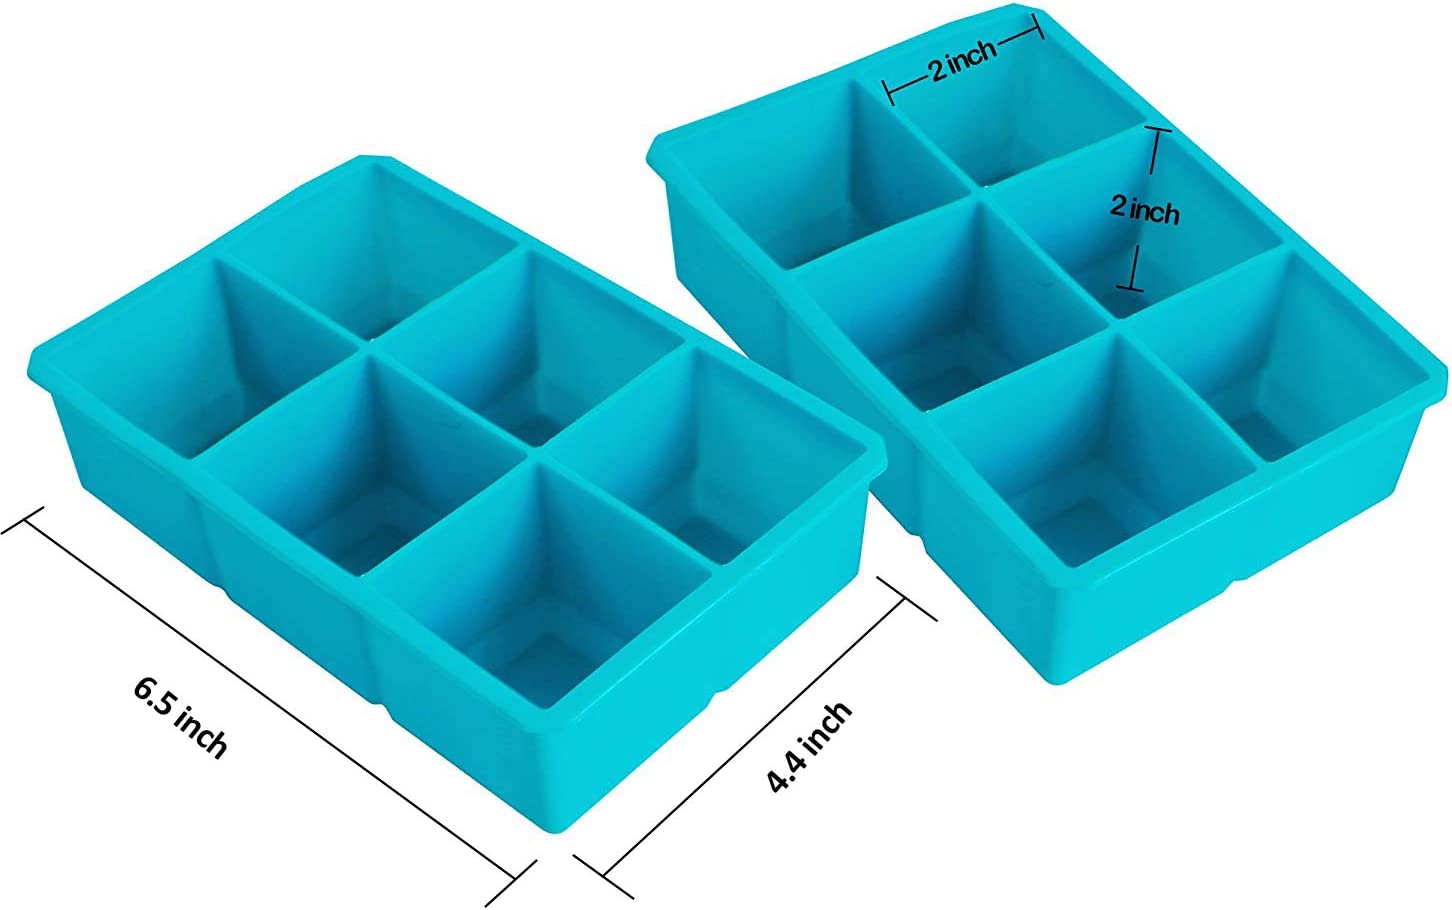 Ice Cube Tray, Large, Pack Of 2 - Flexible 8 Cavity Silicone Ice